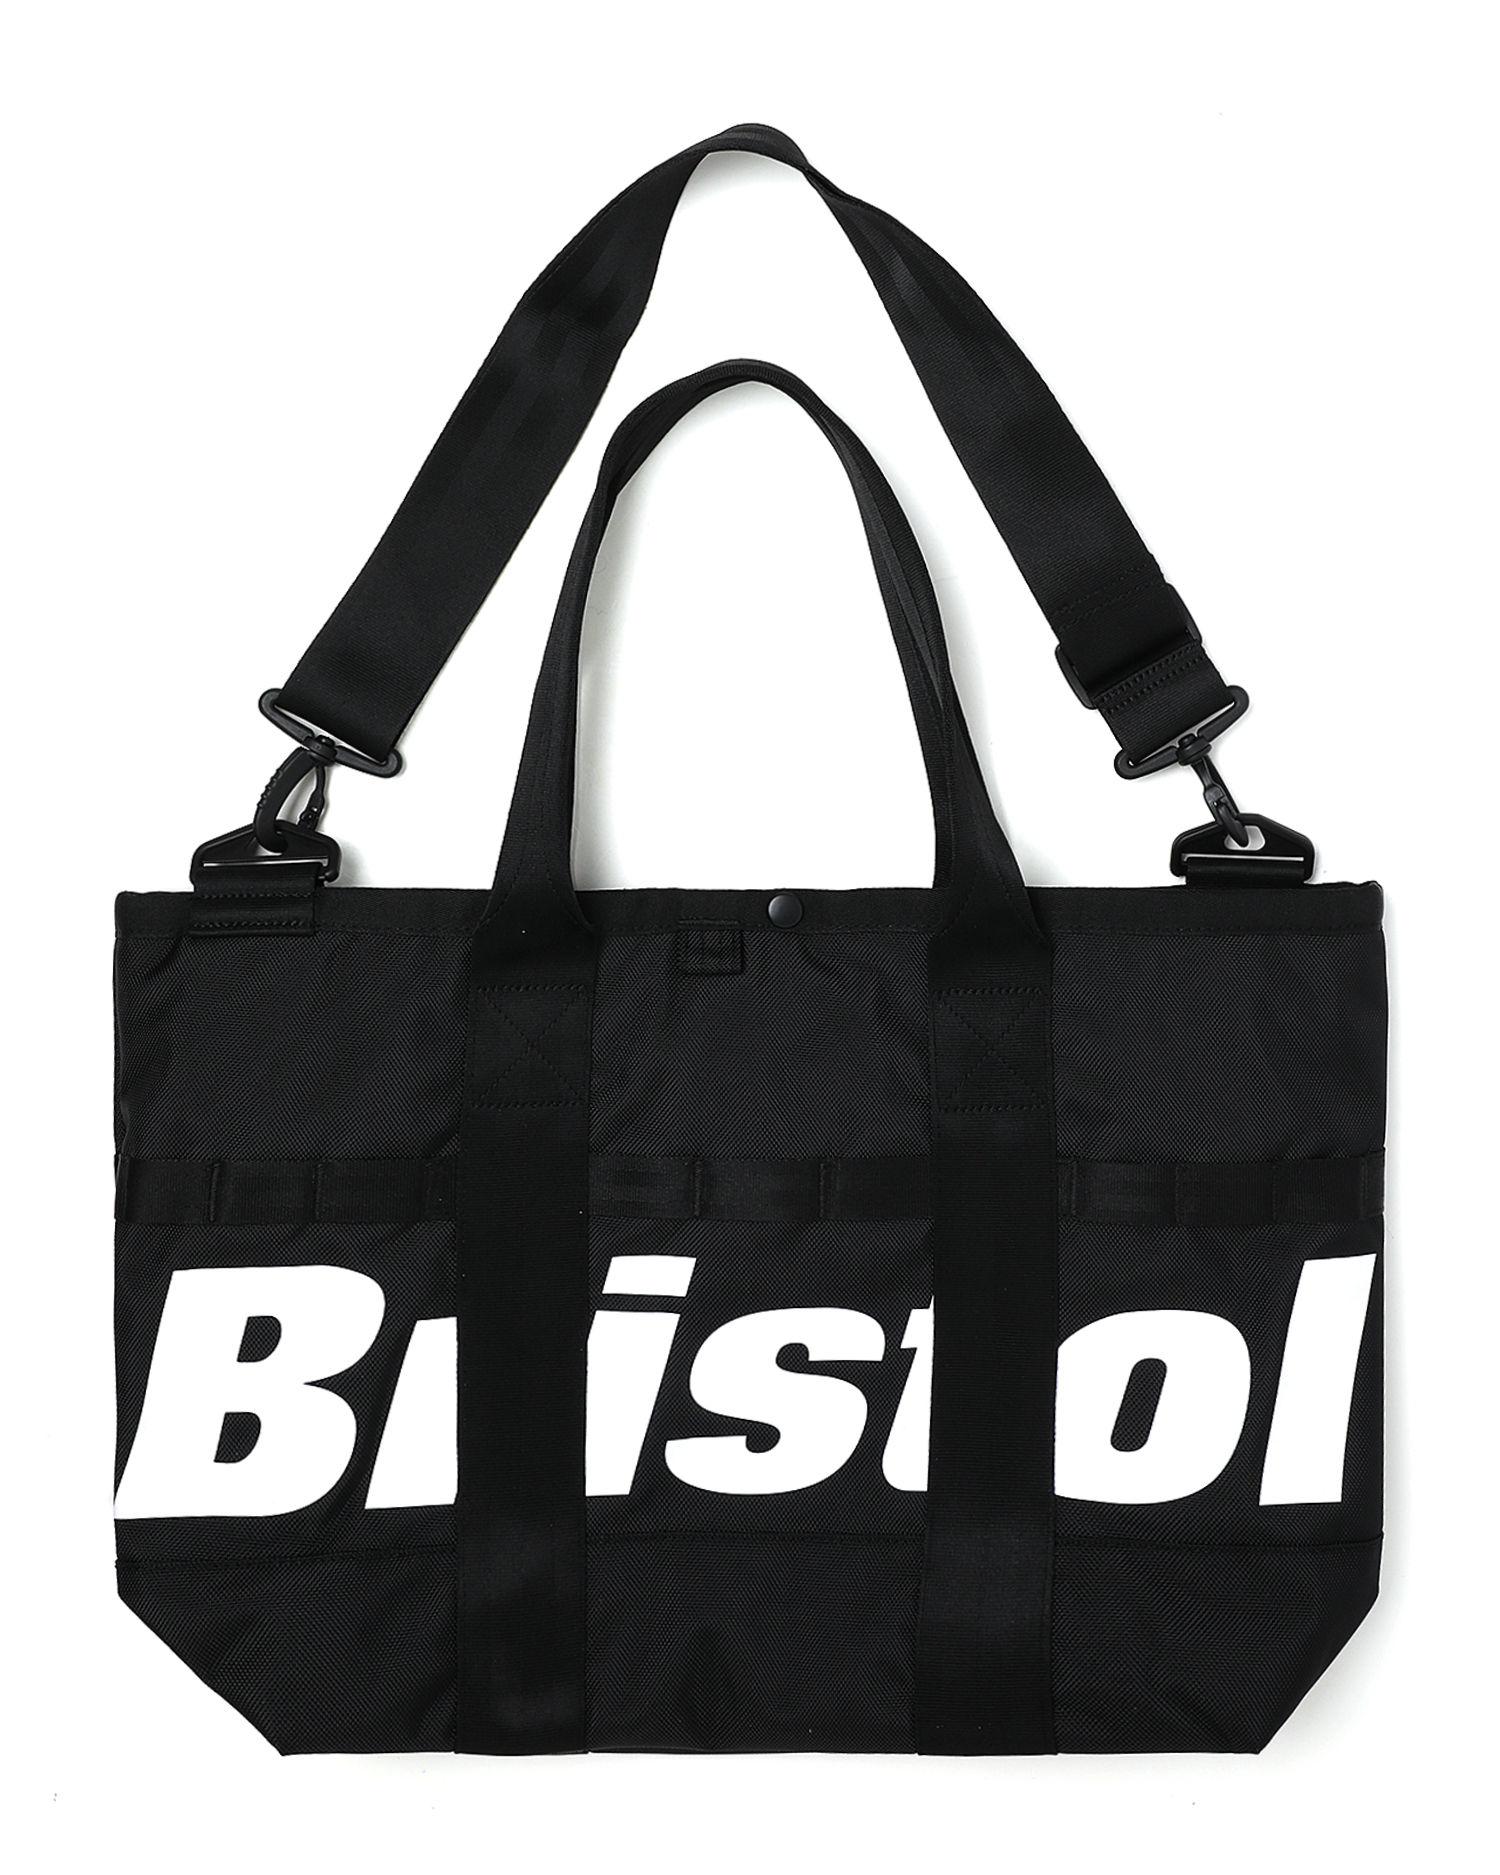 FCRB 23SS SMALL TOTE BAG 新品 ブリストル トートバッグ-